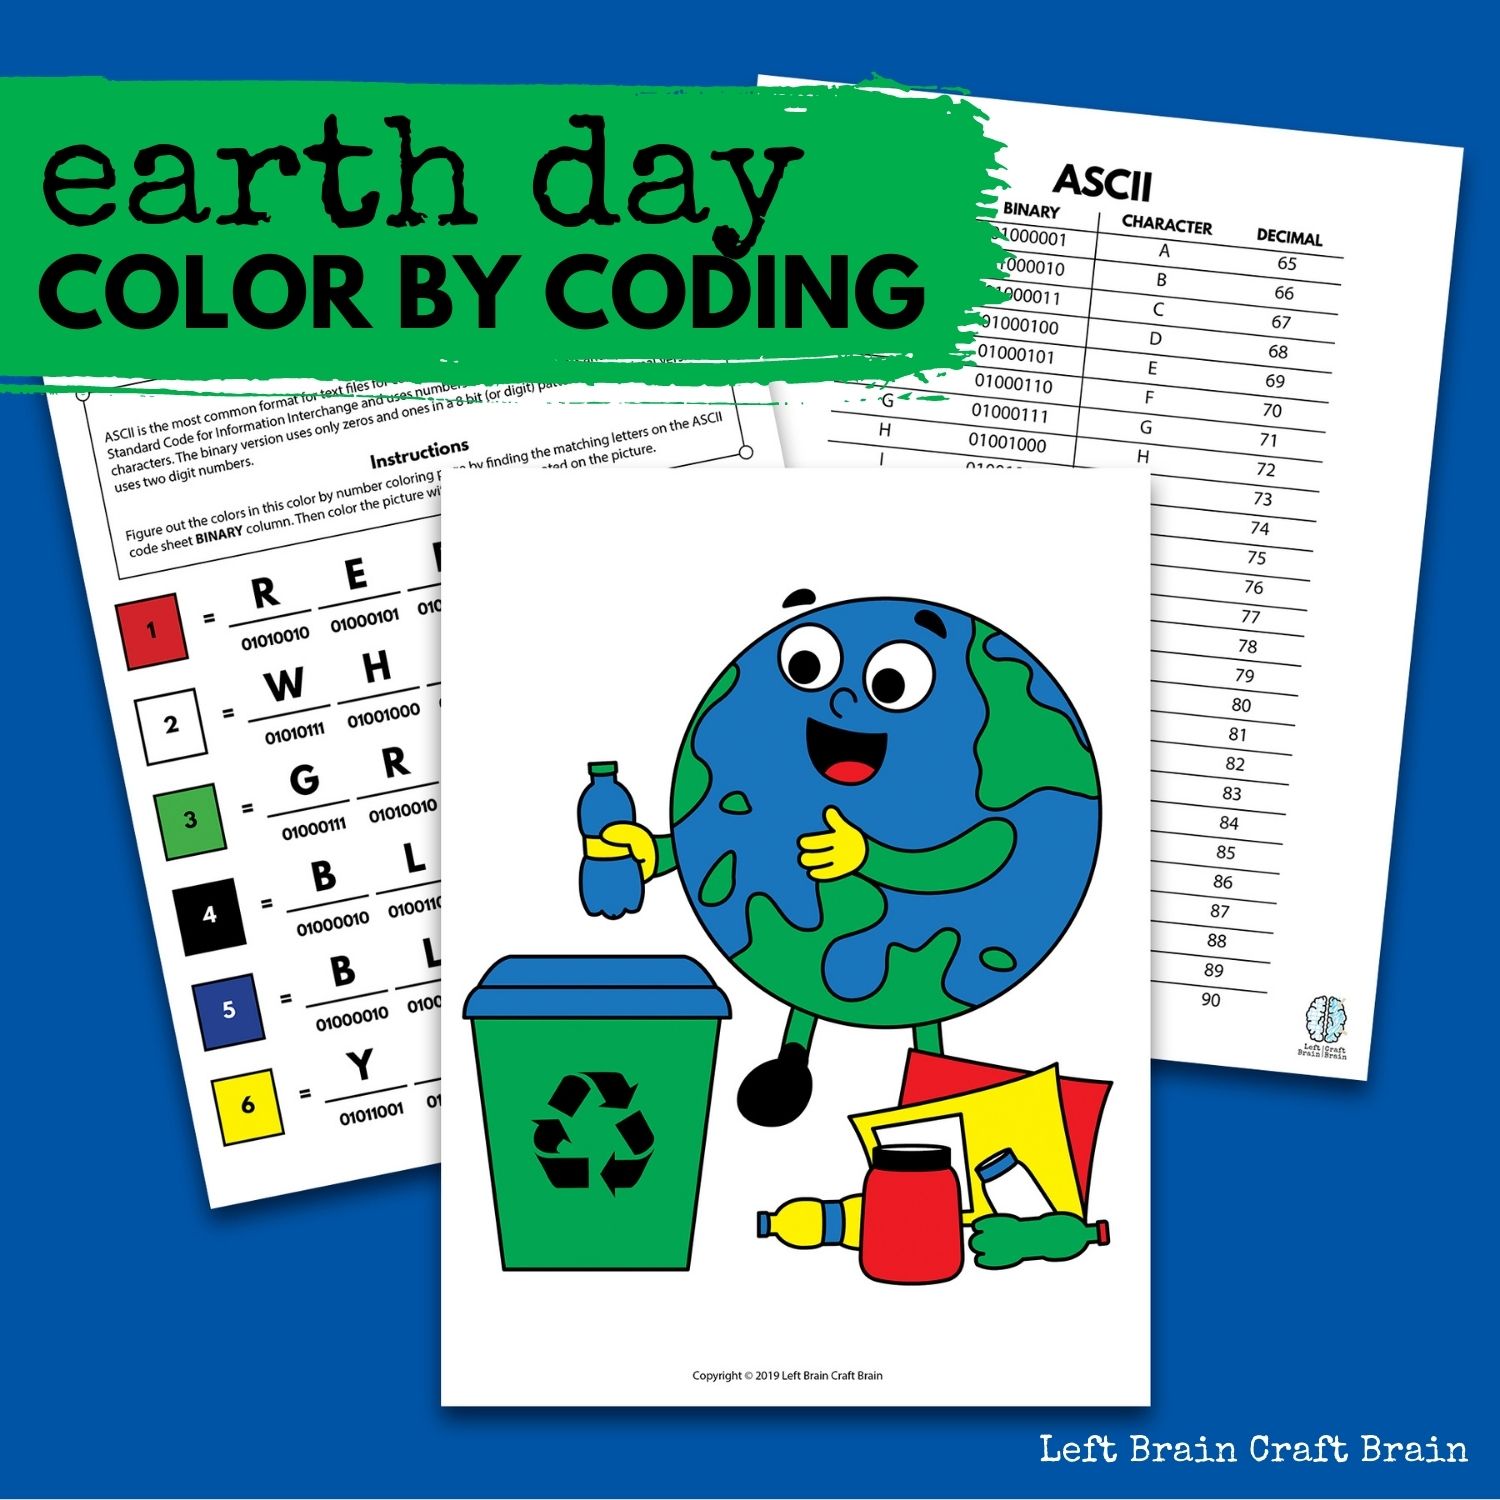 earth-day-color-by-coding-1500x1500-1